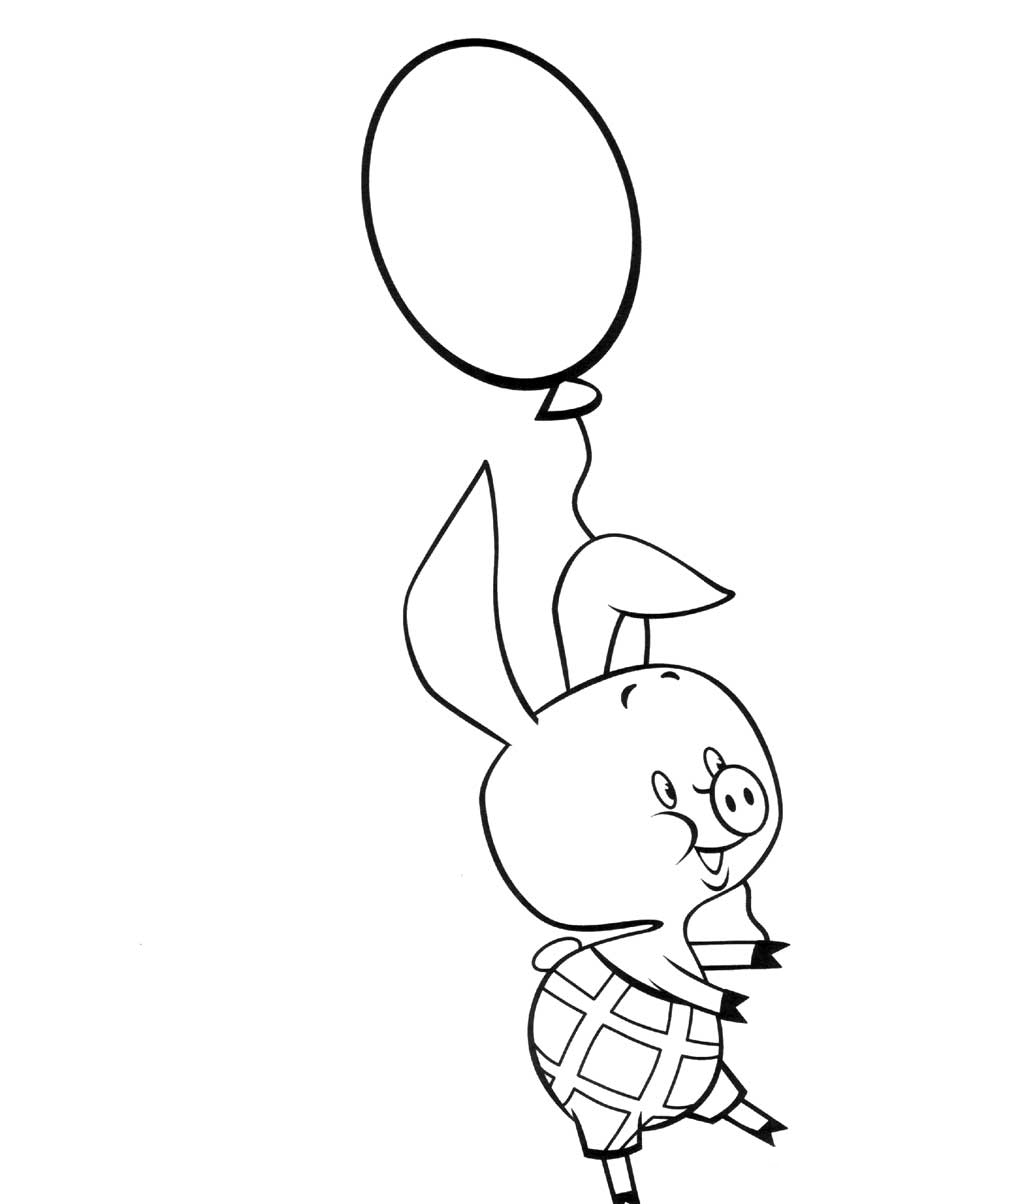 Balloon coloring pages for kids to print for free